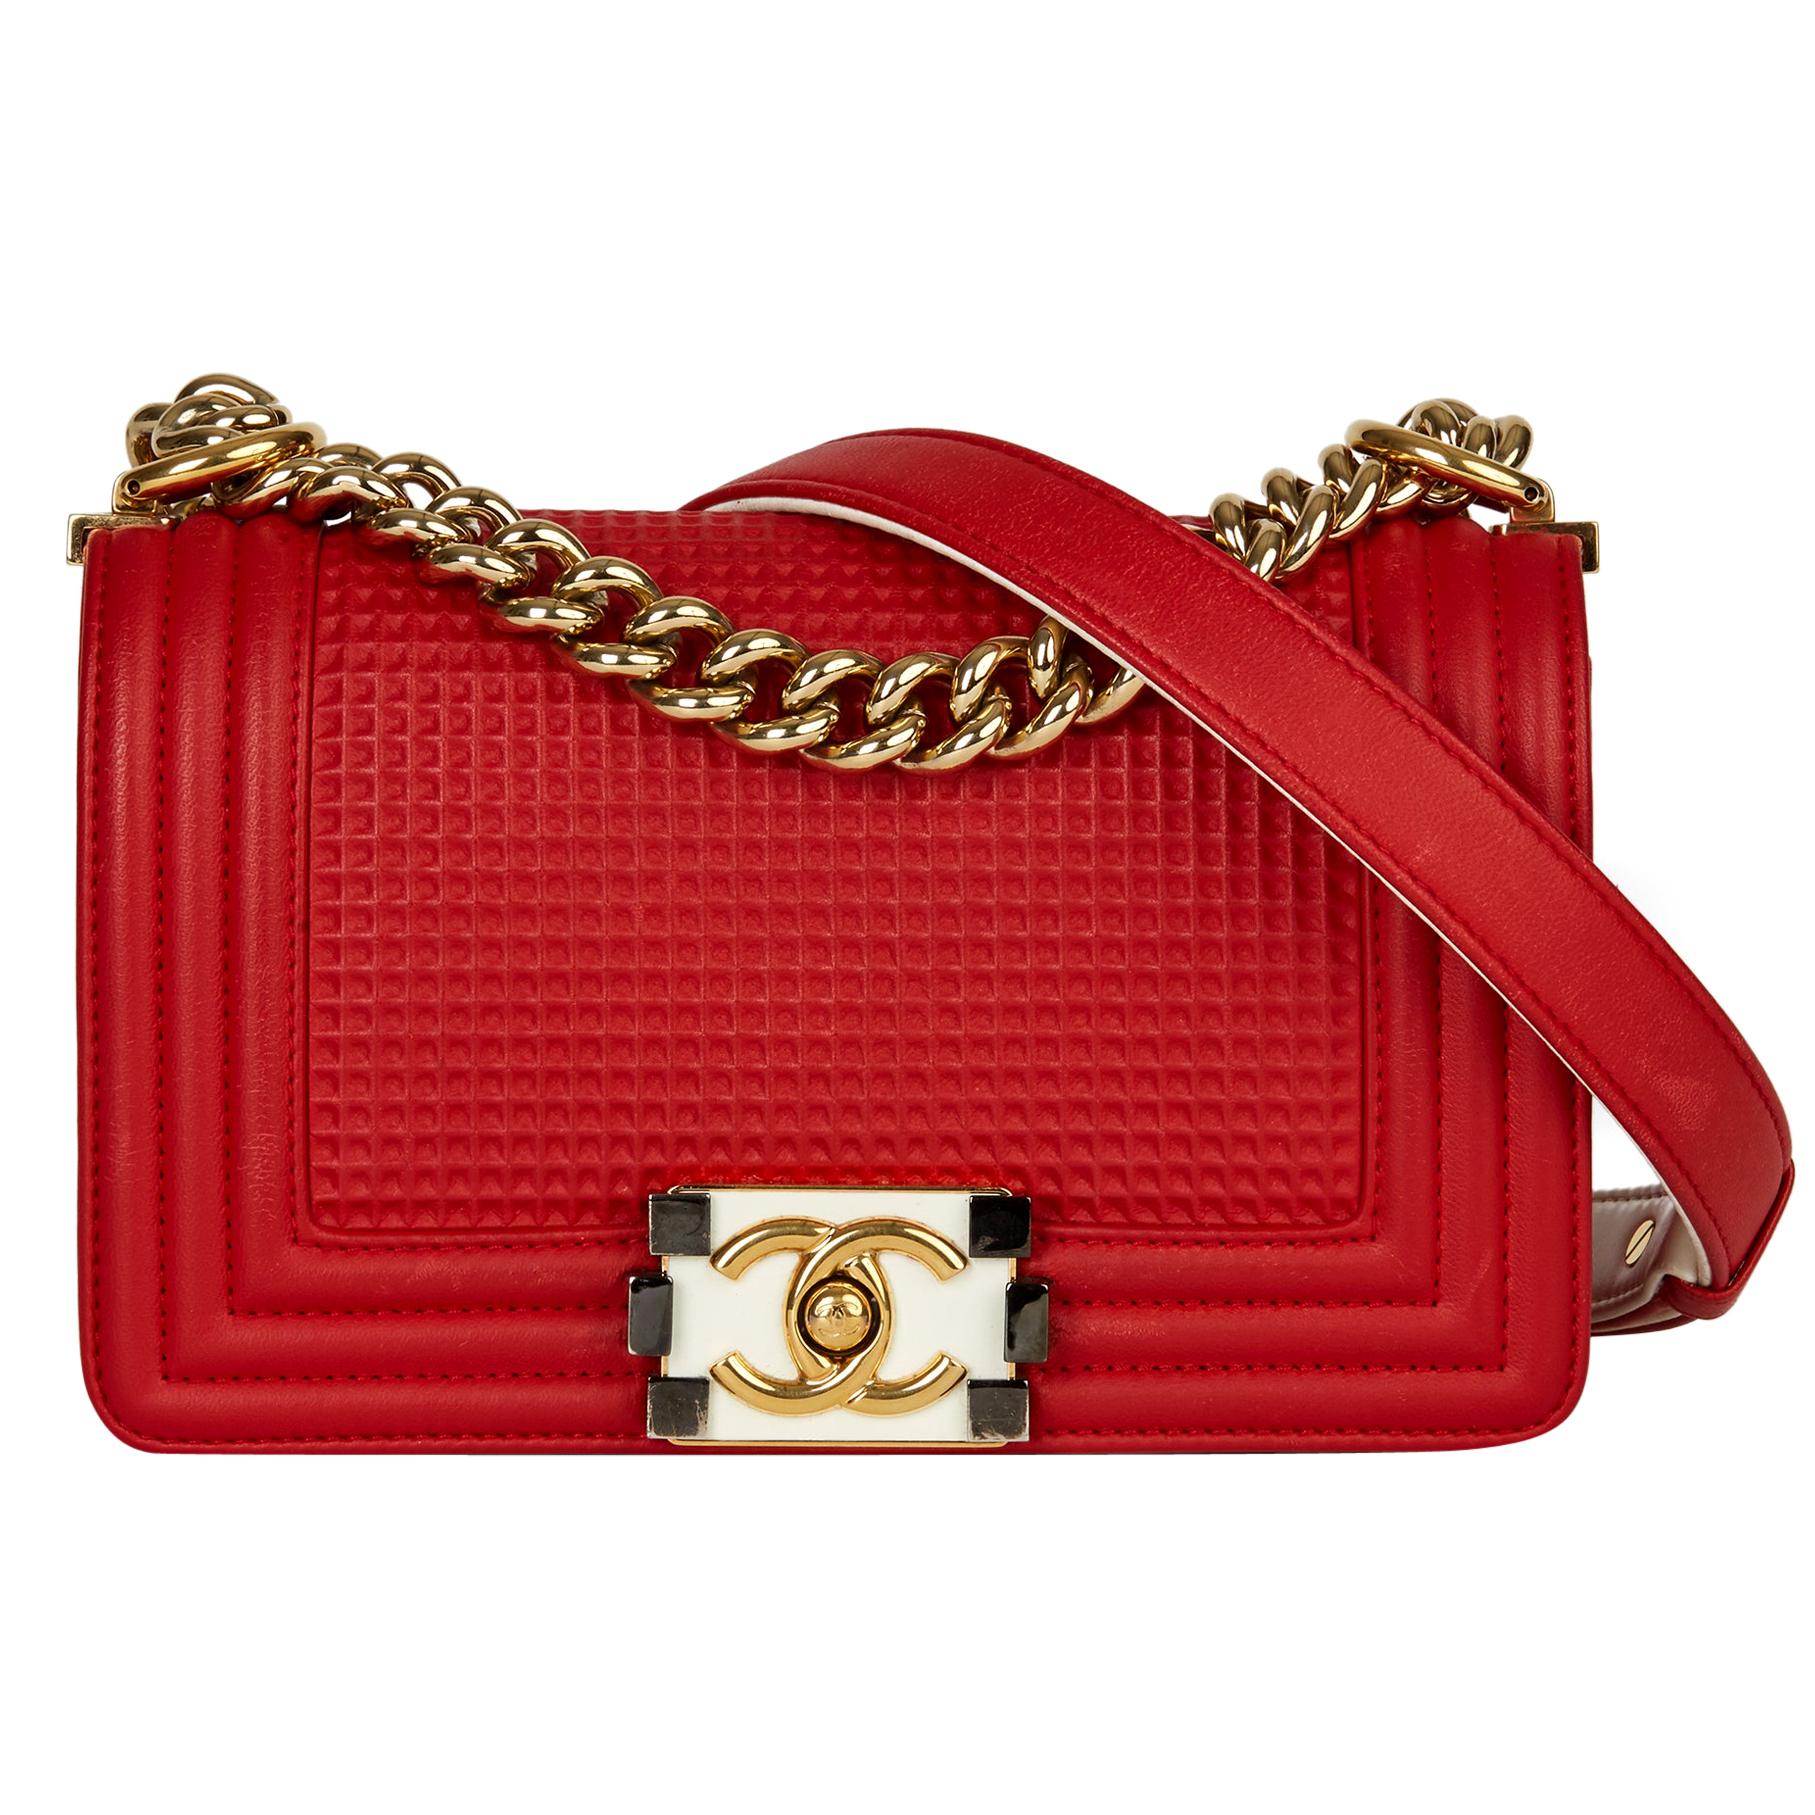 2014 Chanel Red & White Lambskin Cube Small Le Boy